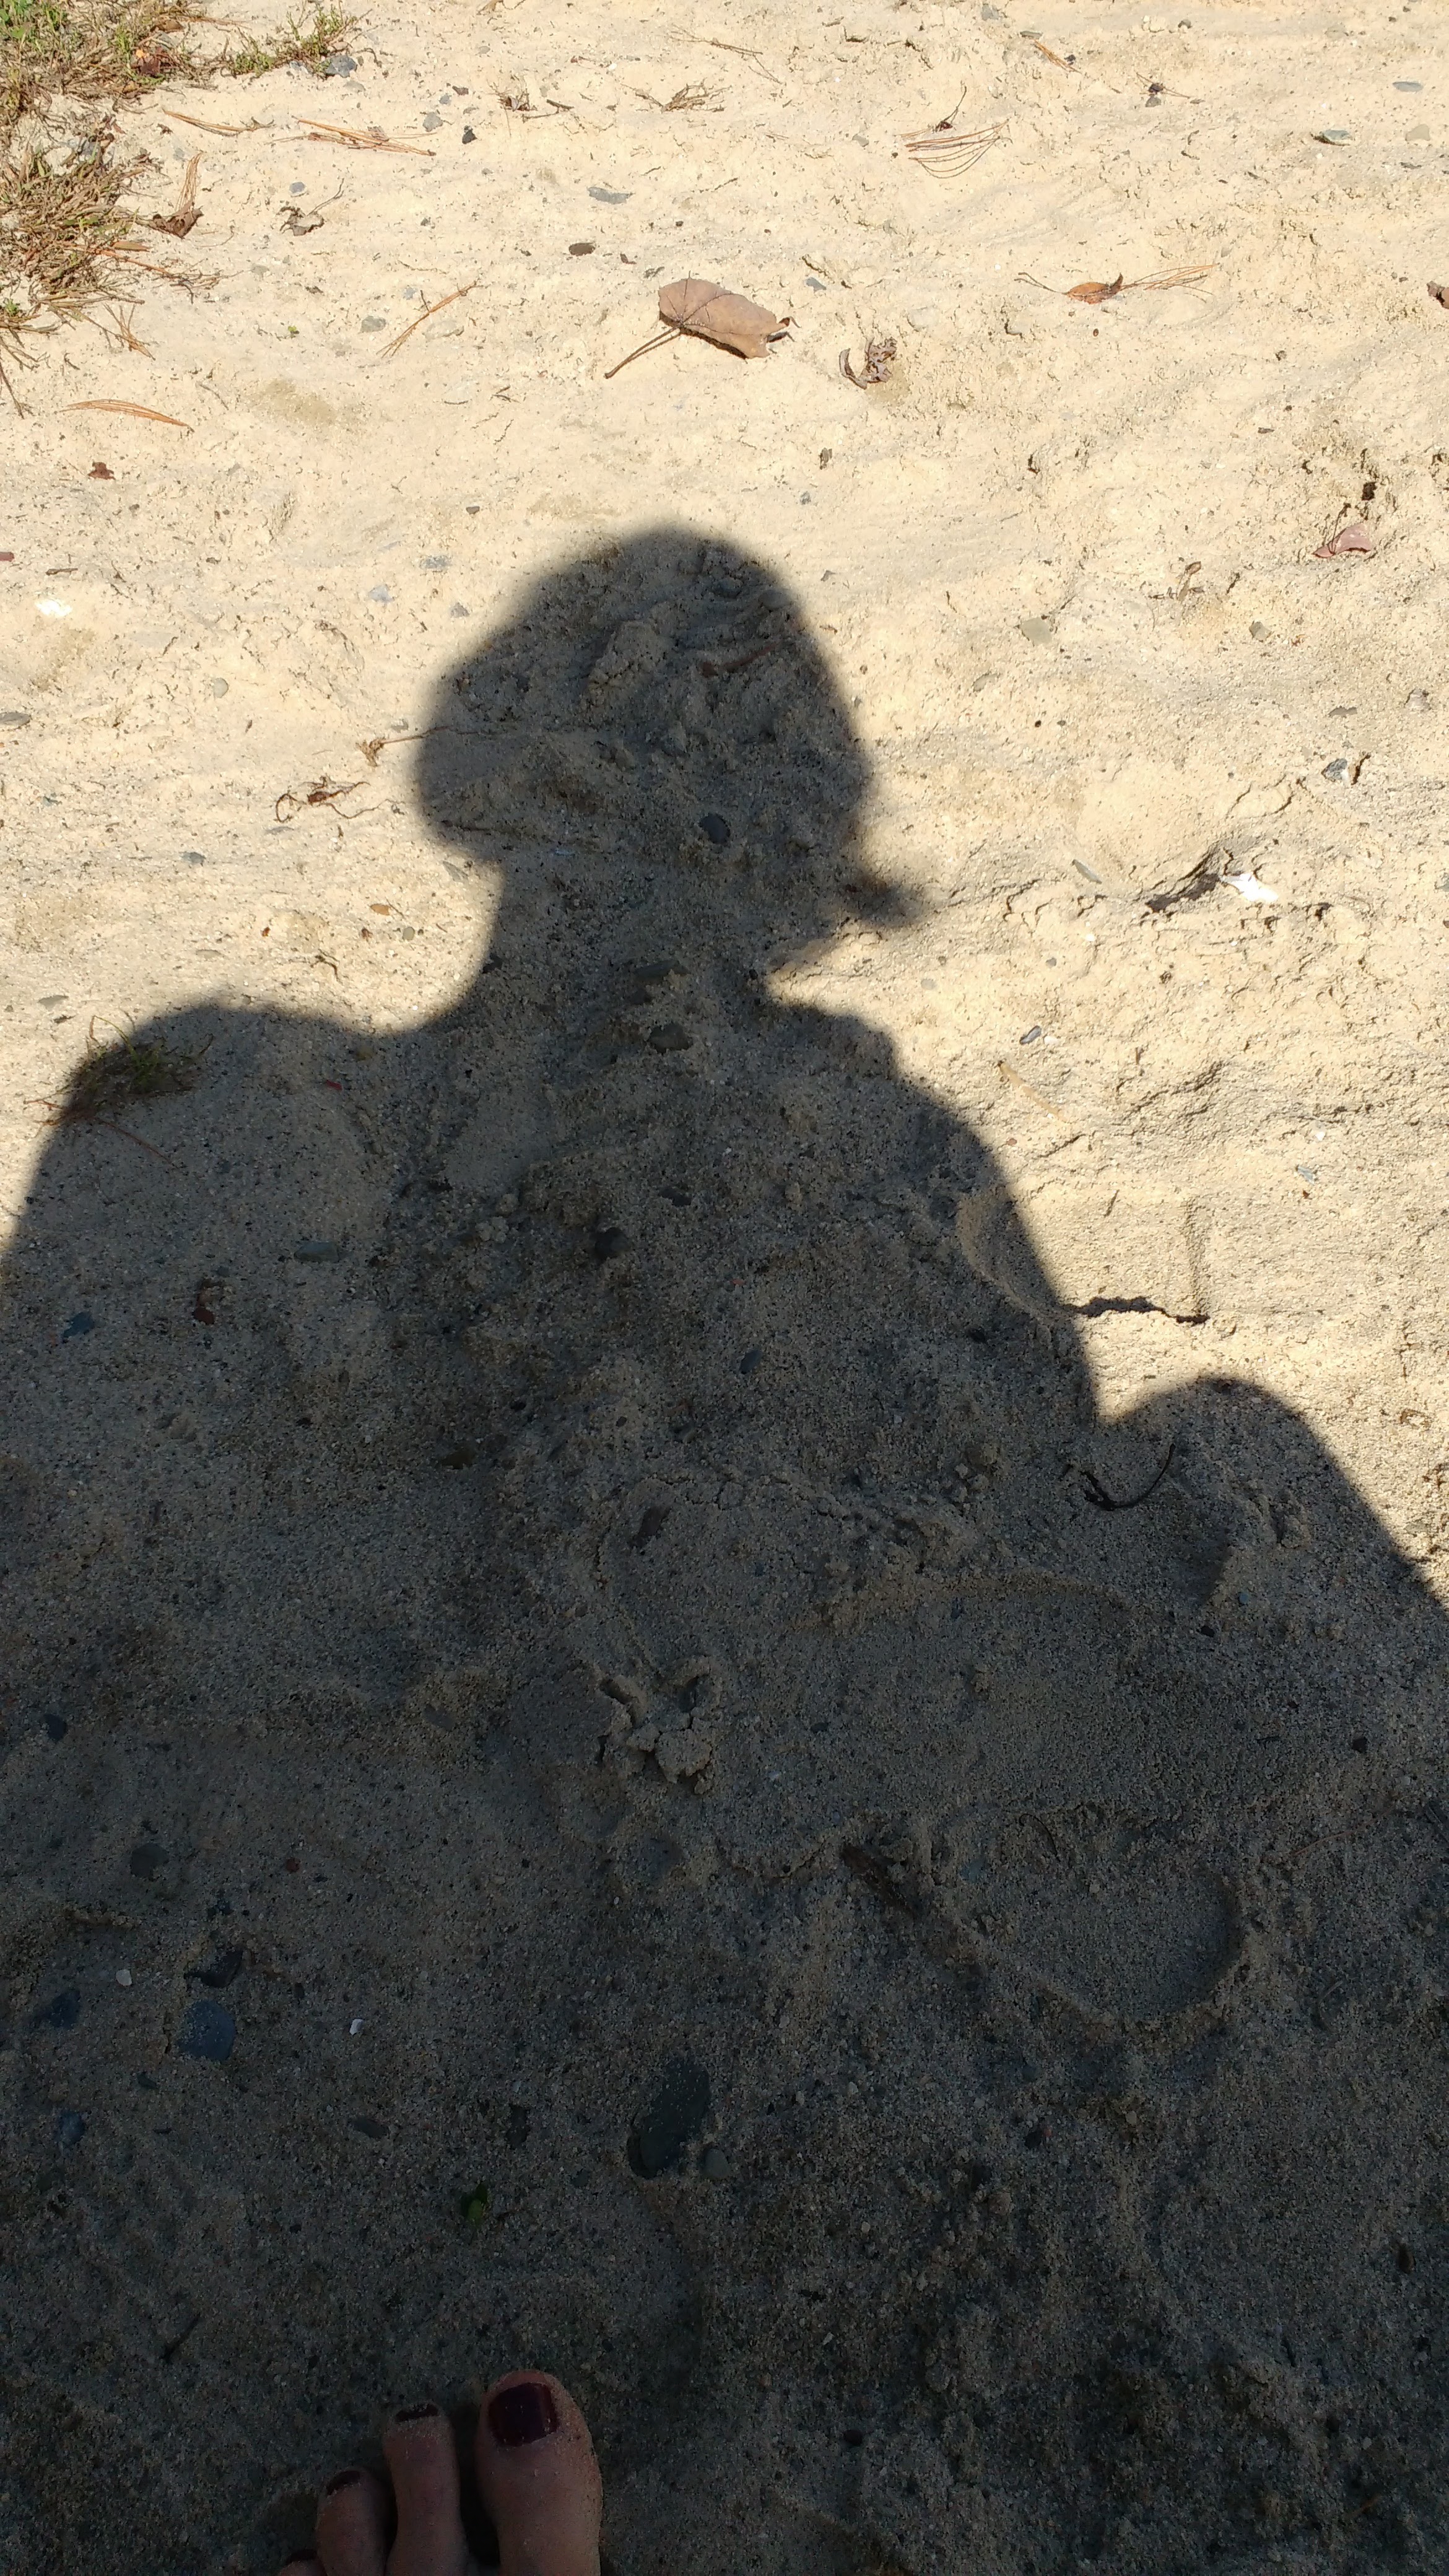 shadow of writer at Long Pond, Omega Institute, October 2017